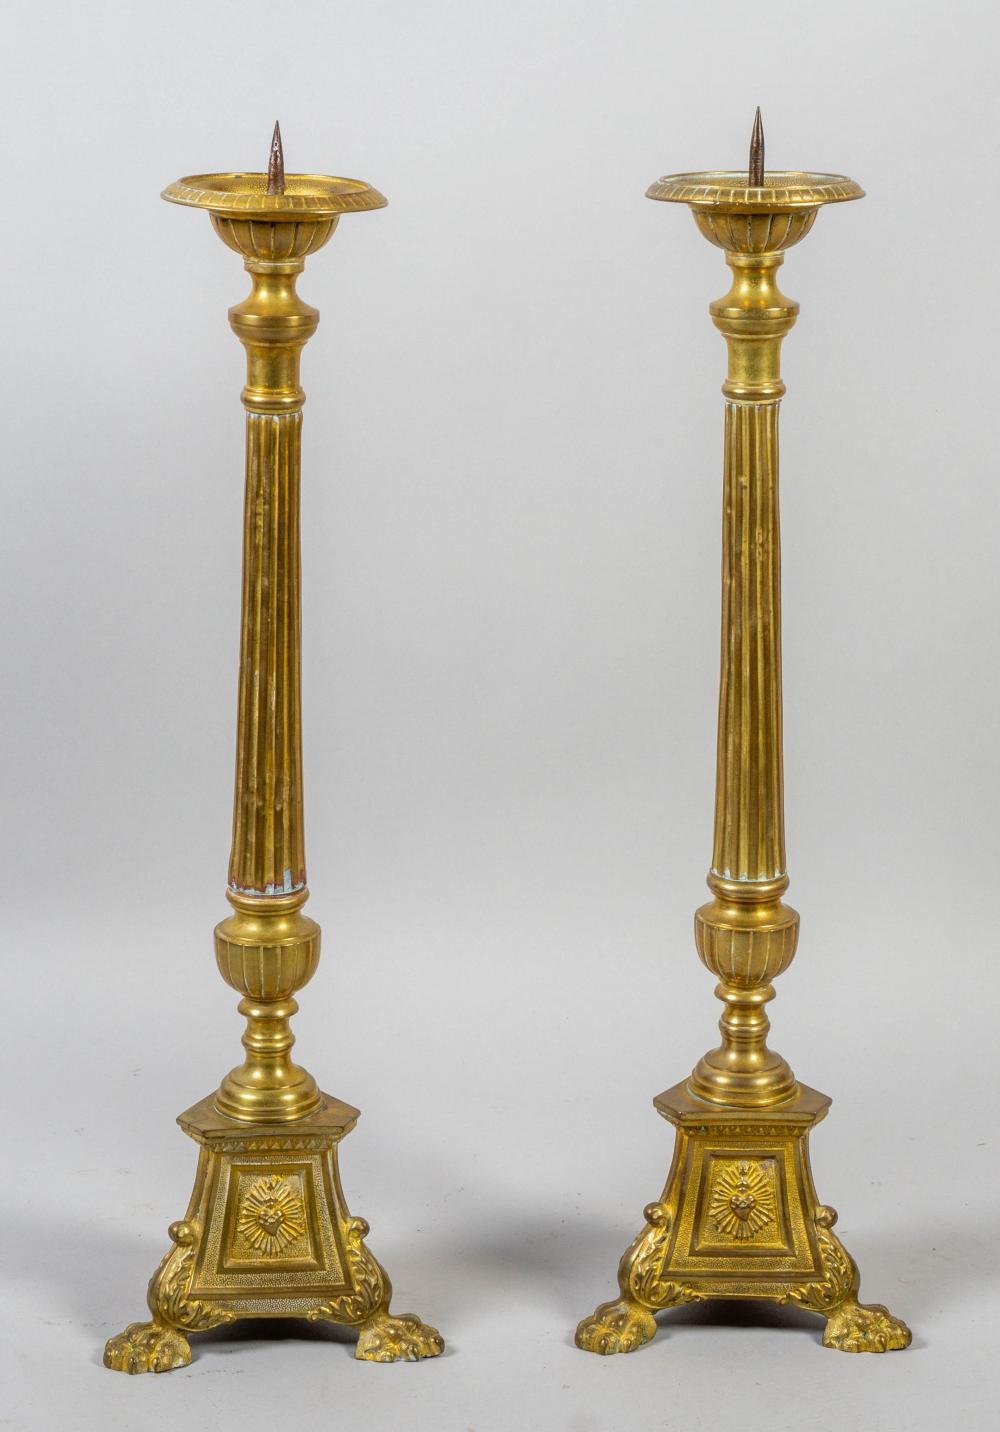 PAIR OF BAROQUE STYLE CAST BRASS 33c775